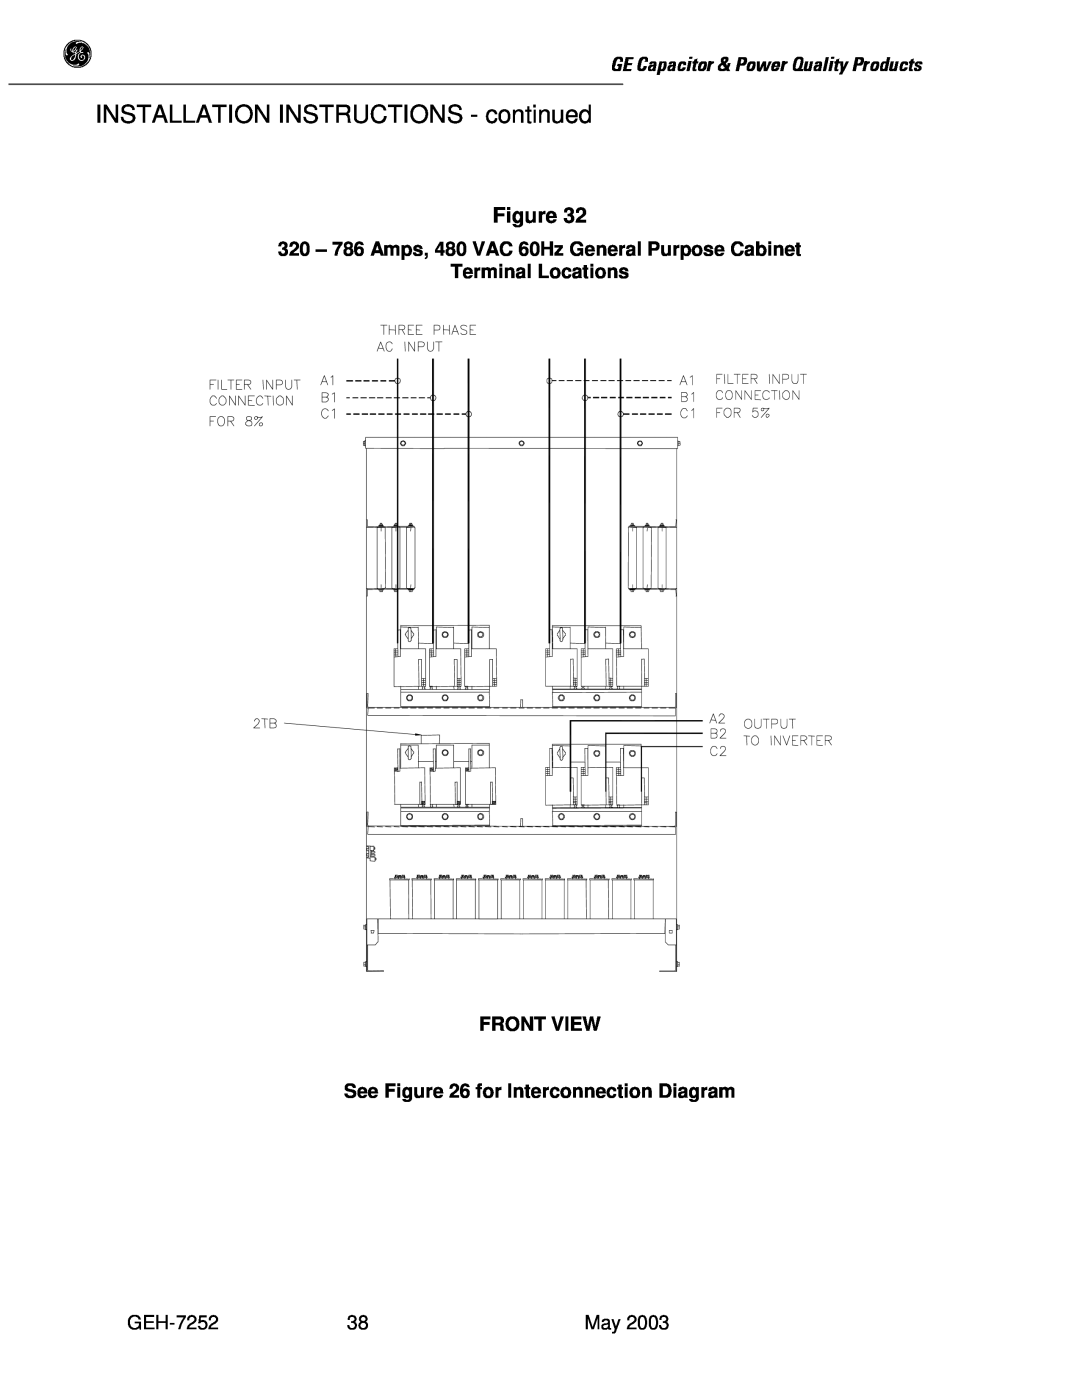 GE SERIES B 480 user manual INSTALLATION INSTRUCTIONS - continued, GE Capacitor & Power Quality Products 